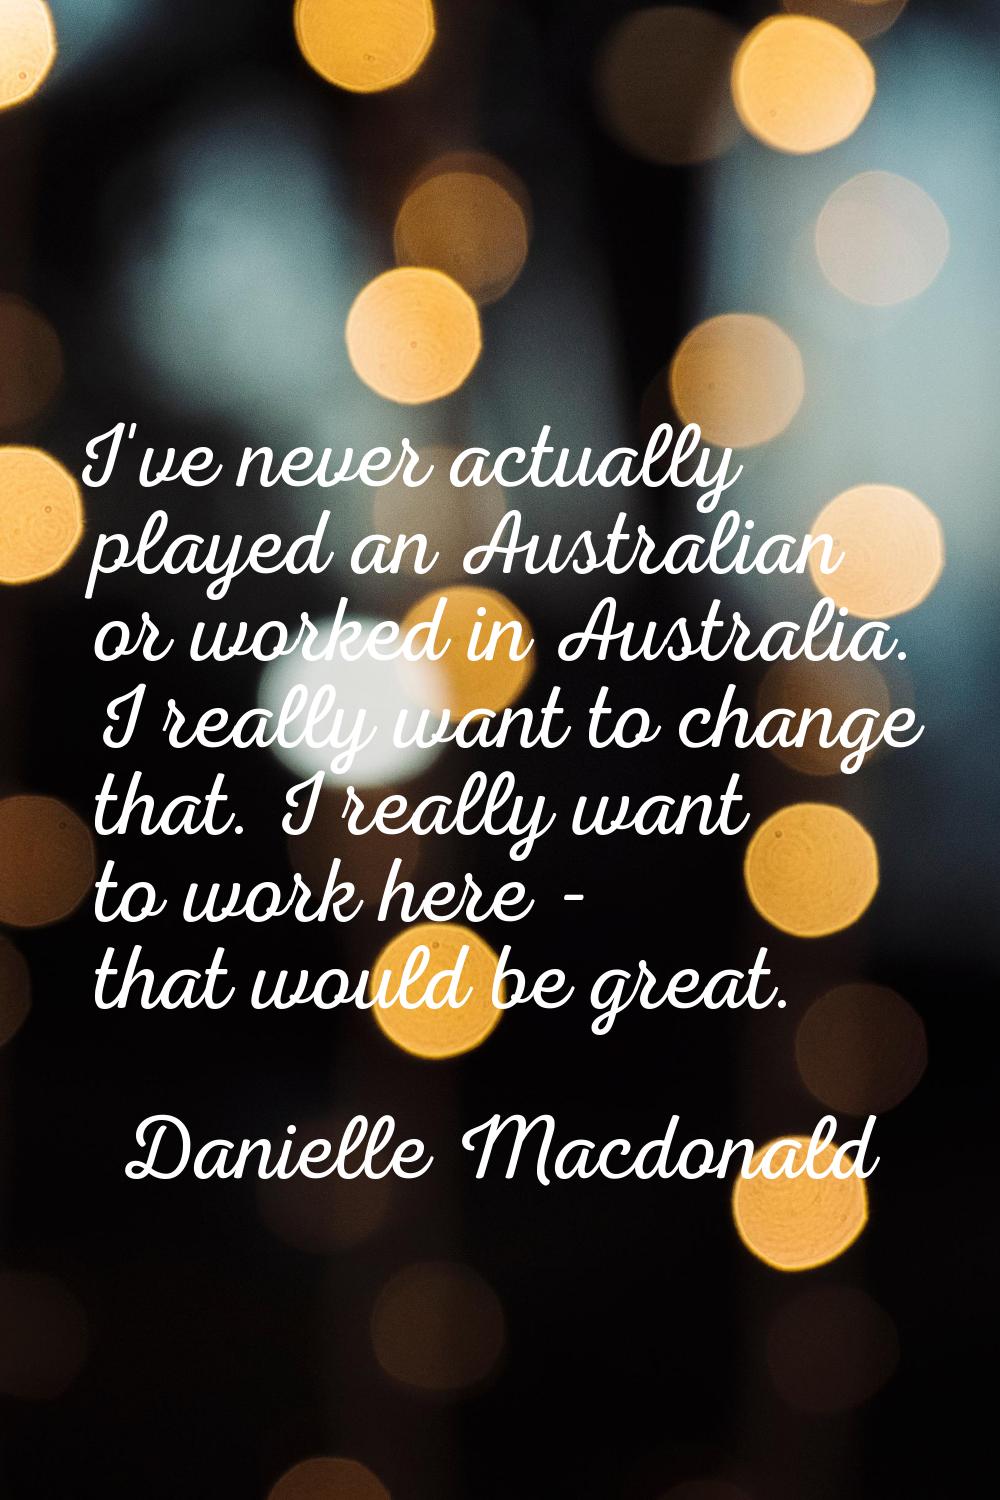 I've never actually played an Australian or worked in Australia. I really want to change that. I re